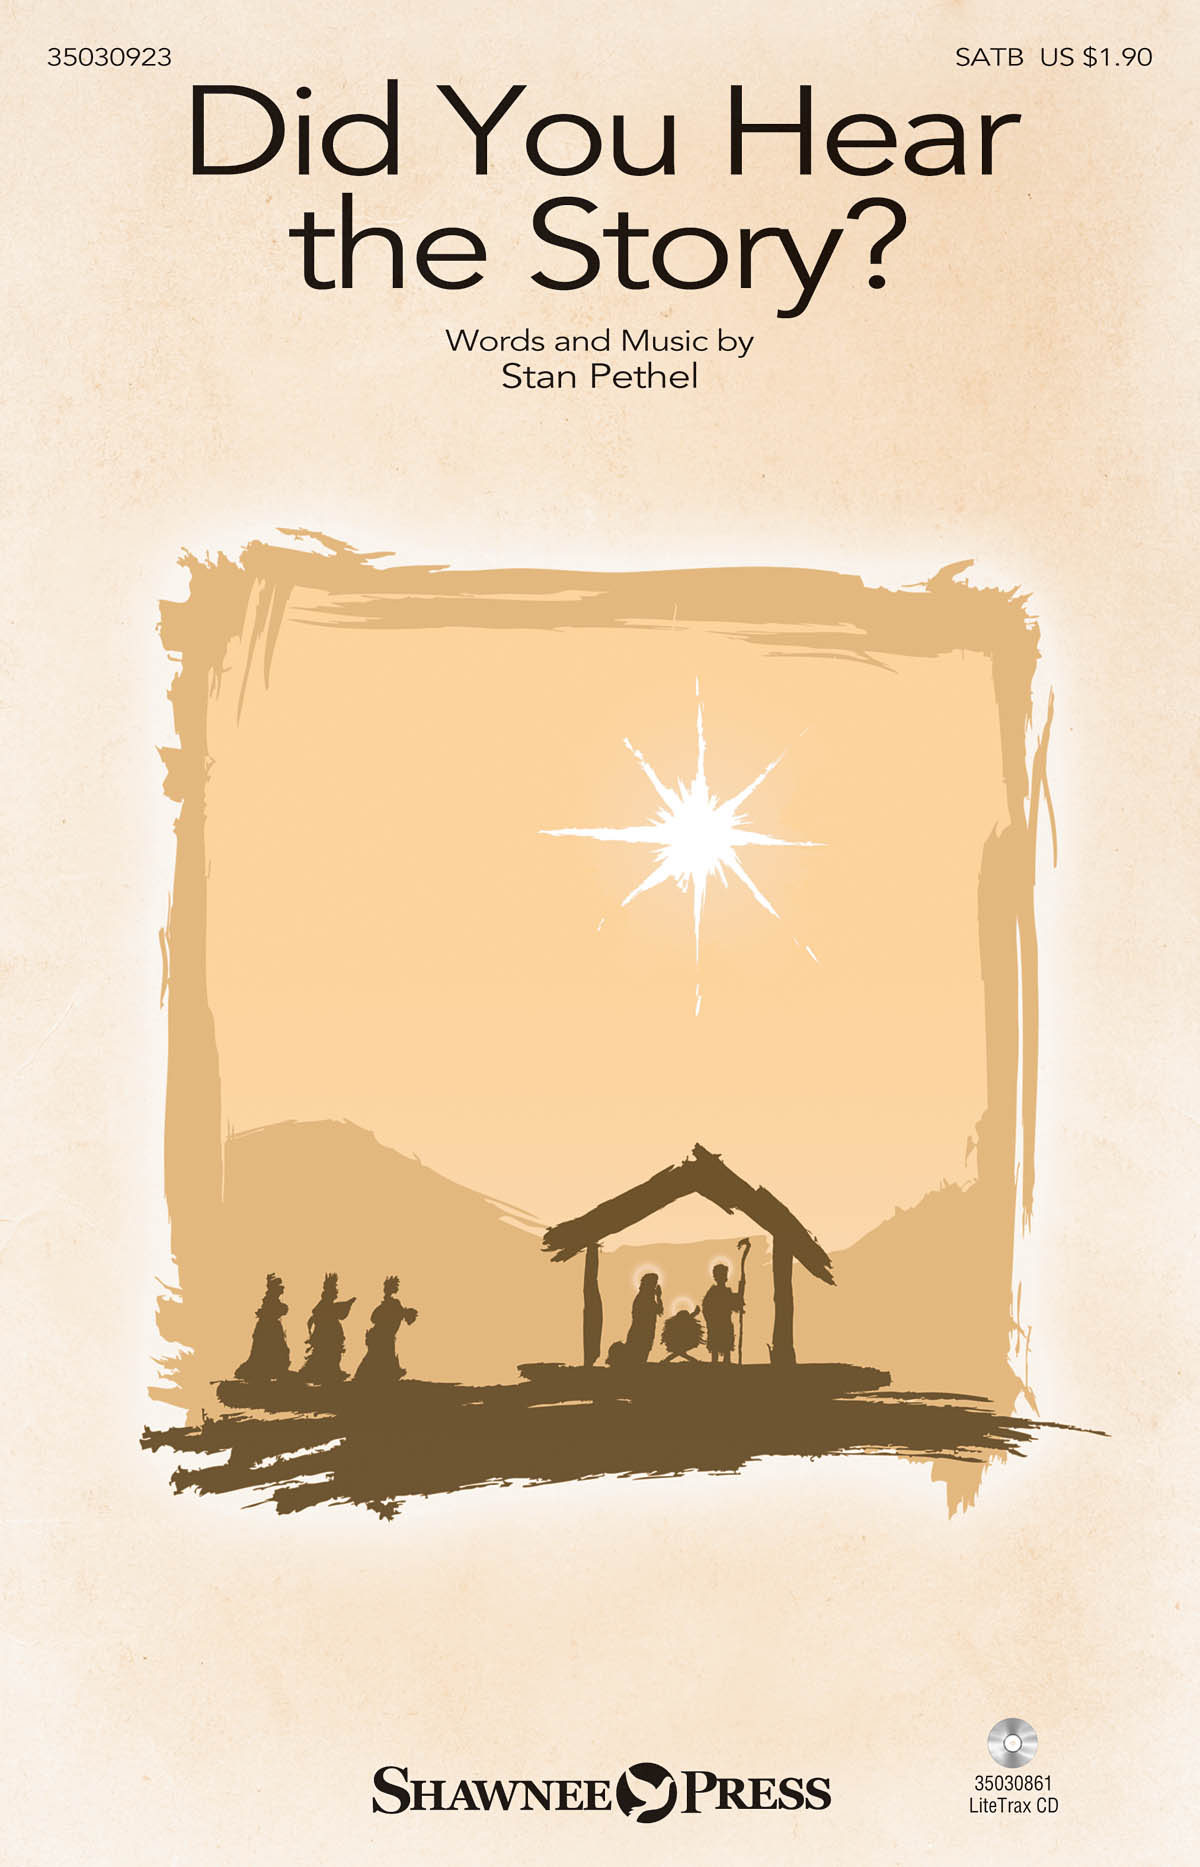 Stan Pethel: Did You Hear the Story? (SATB)